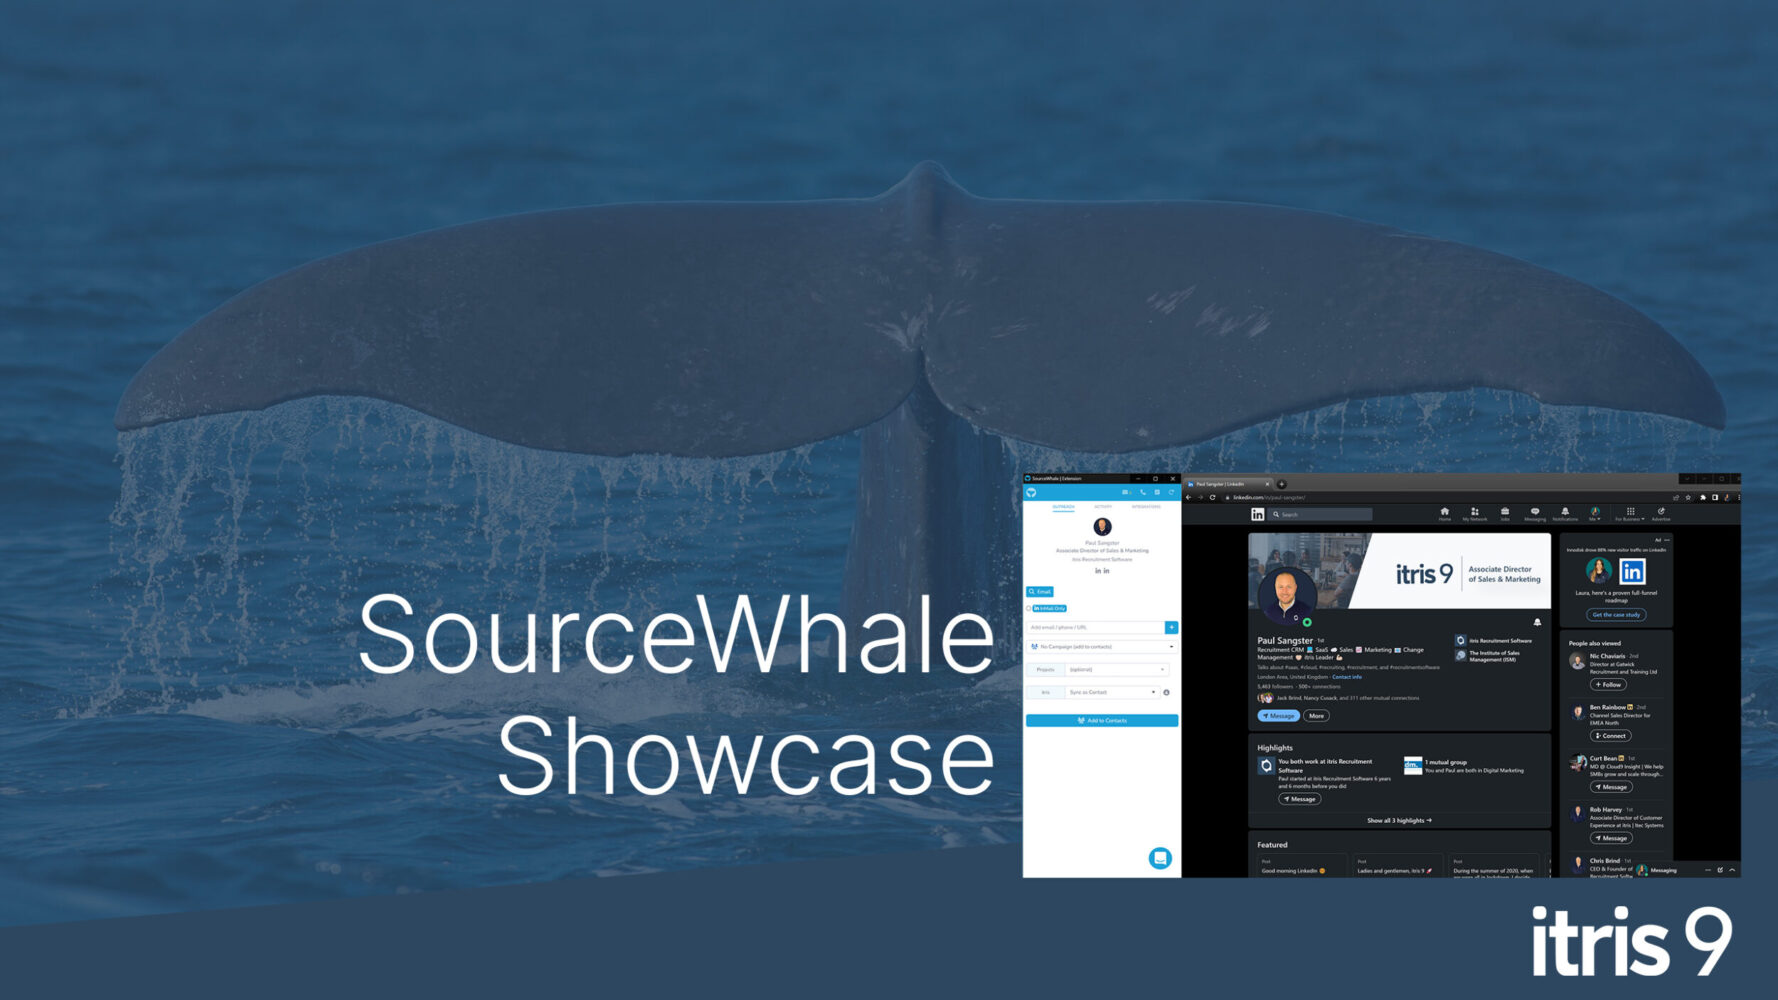 Recruitment CRM software itris 9 - Sourcewhale showcase Video